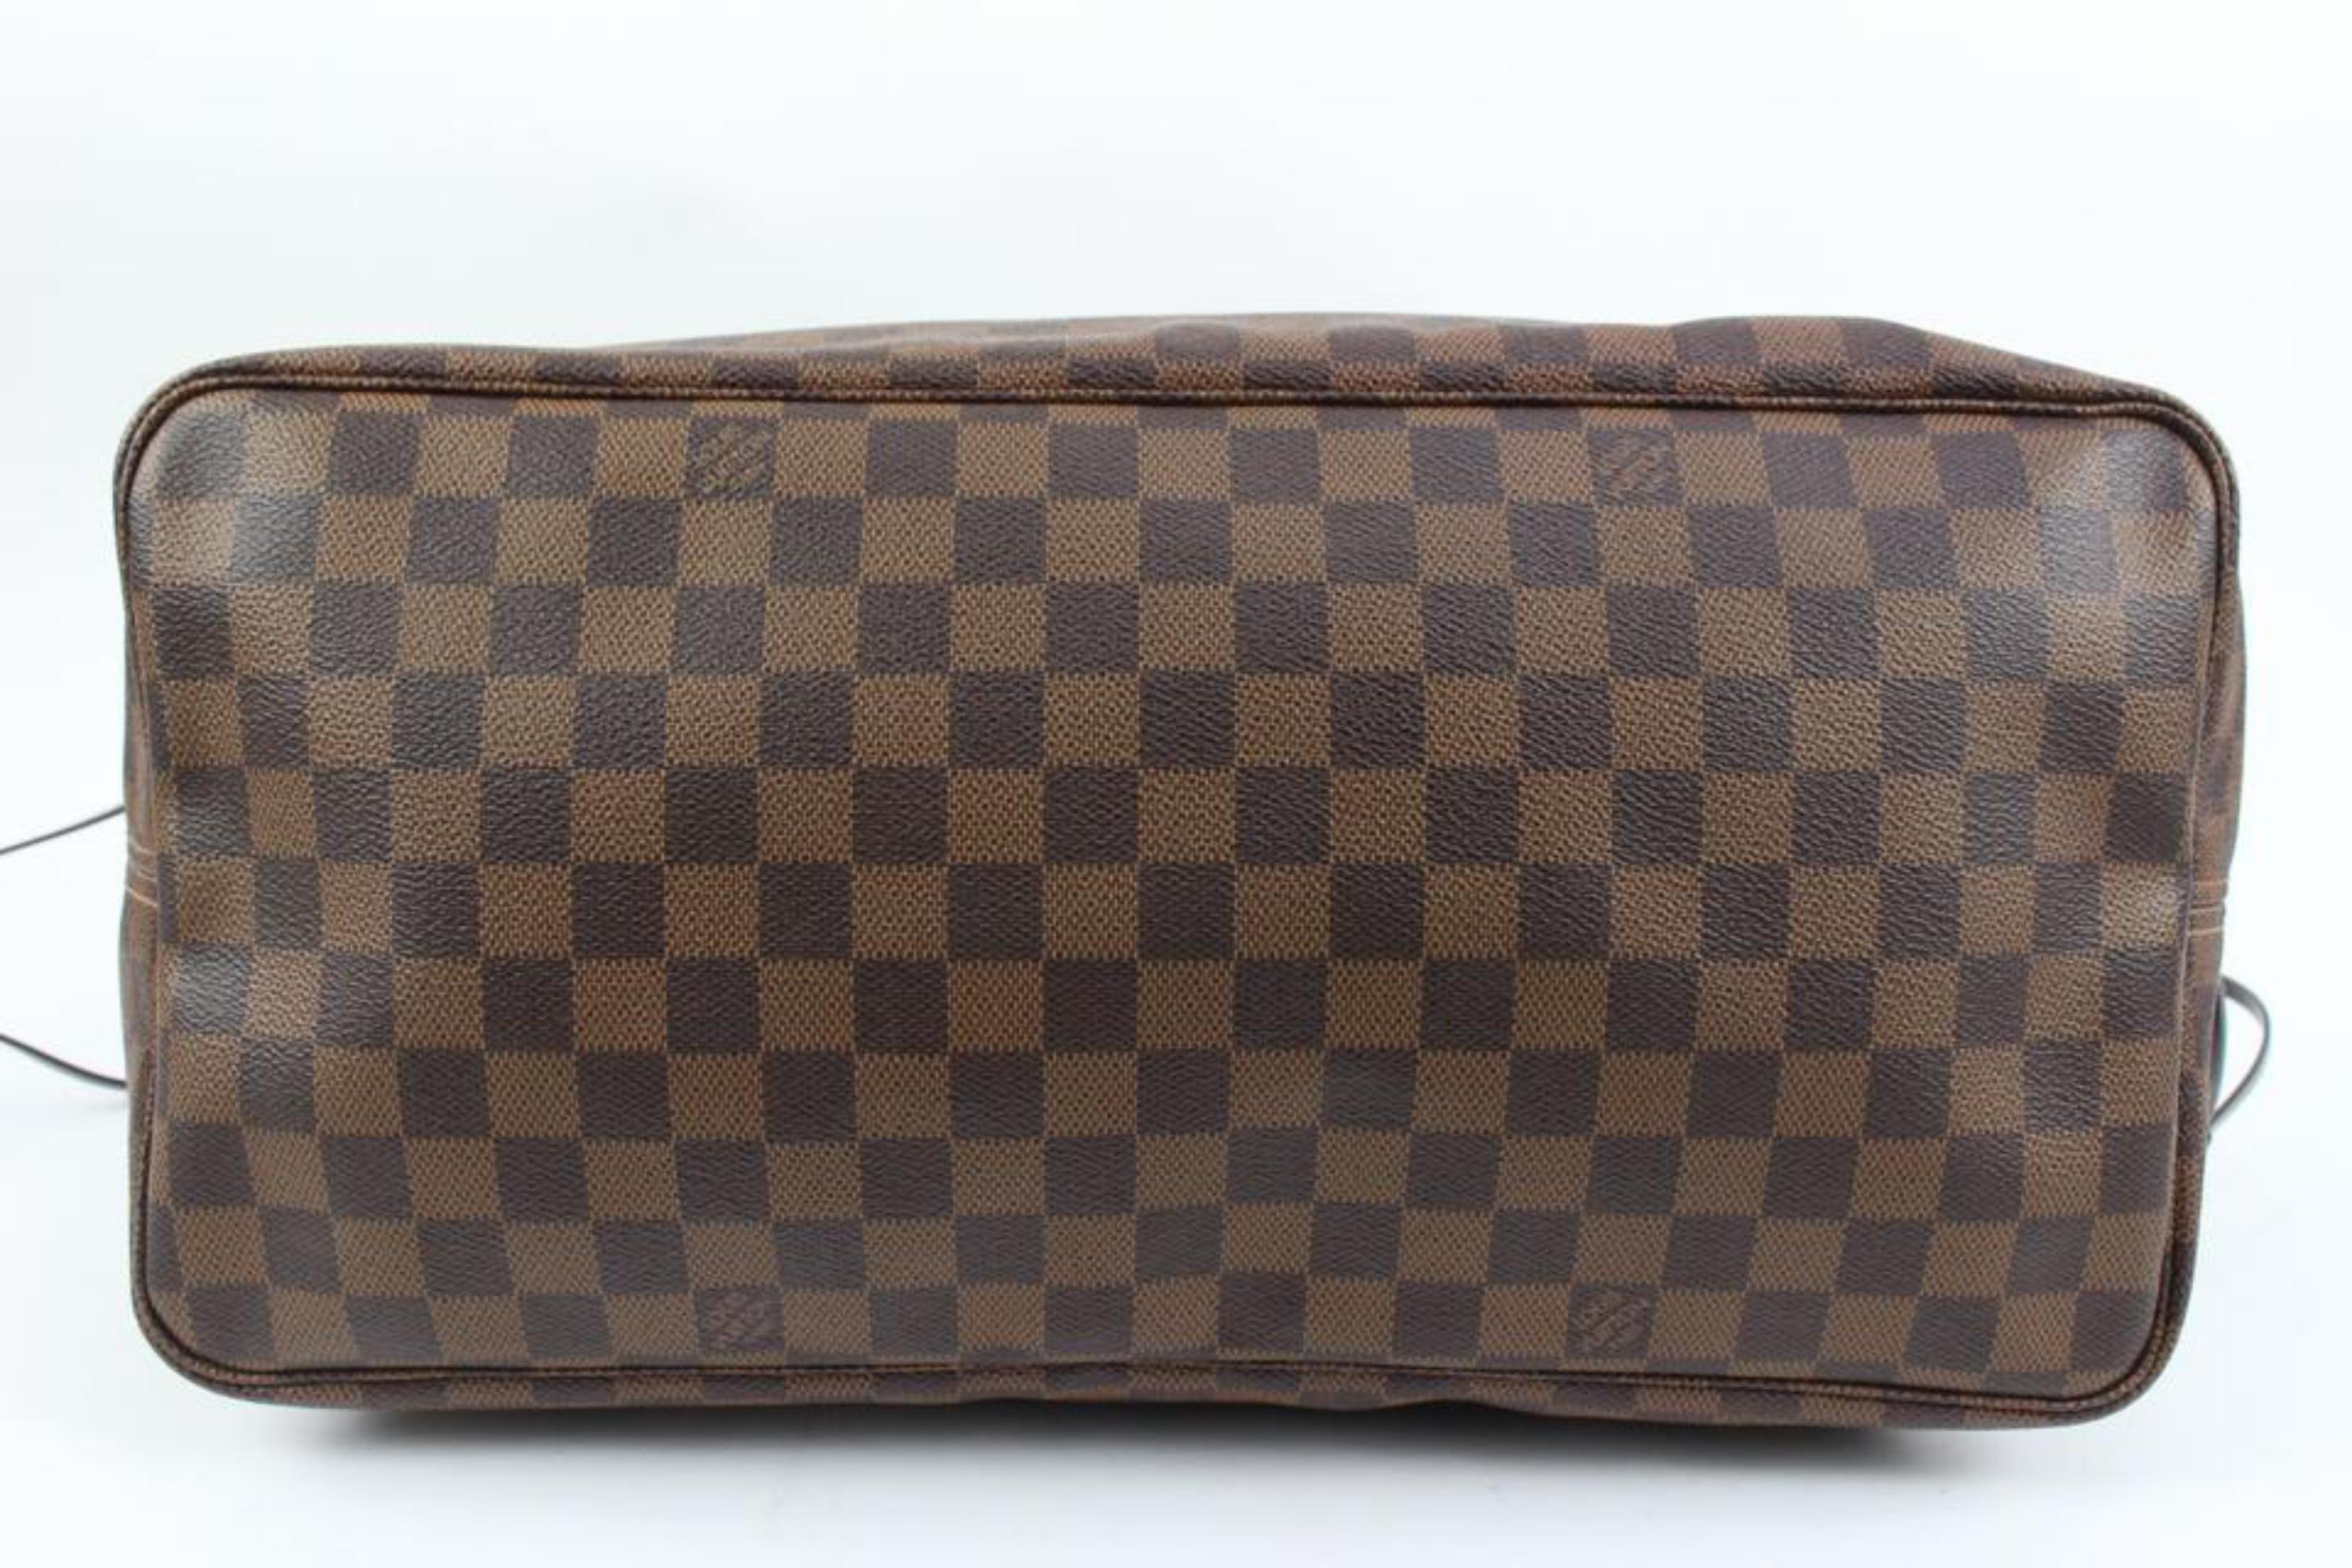 Brown Louis Vuitton Damier Ebene Neverfull GM Tote Bag 29lv223s For Sale